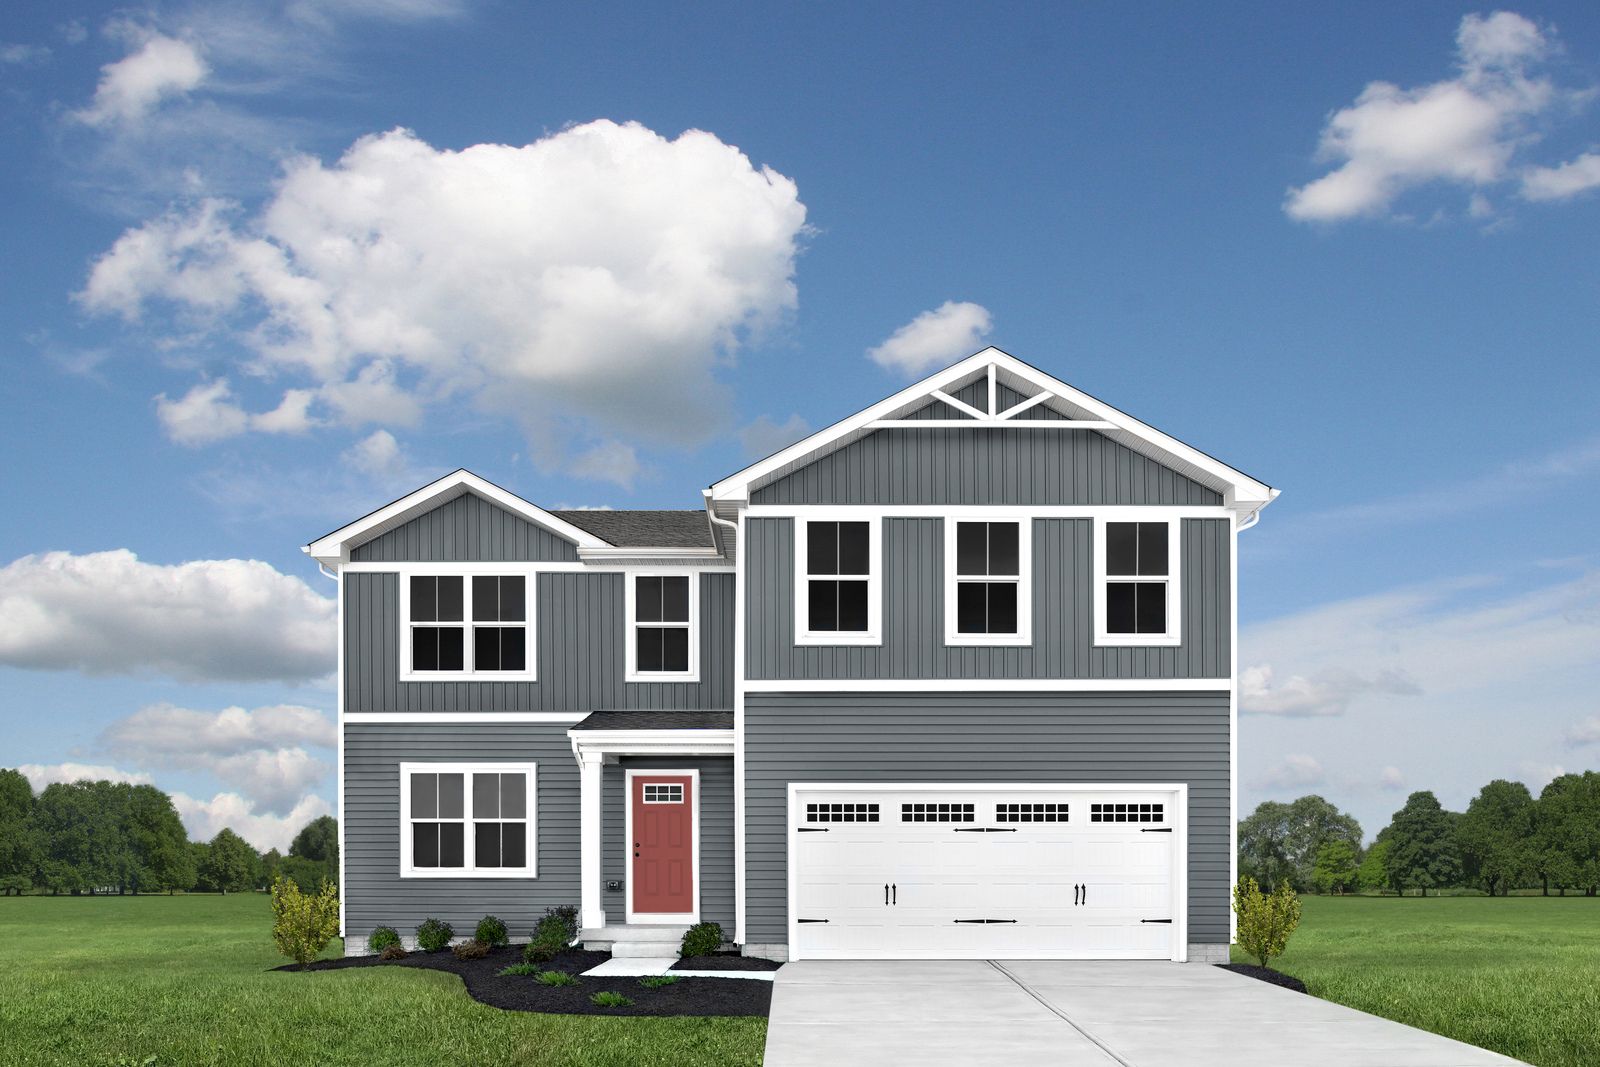 THE LOWEST PRICED COMMUNITY NEAR FUQUAY-VARINA FROM THE UPPER $270S